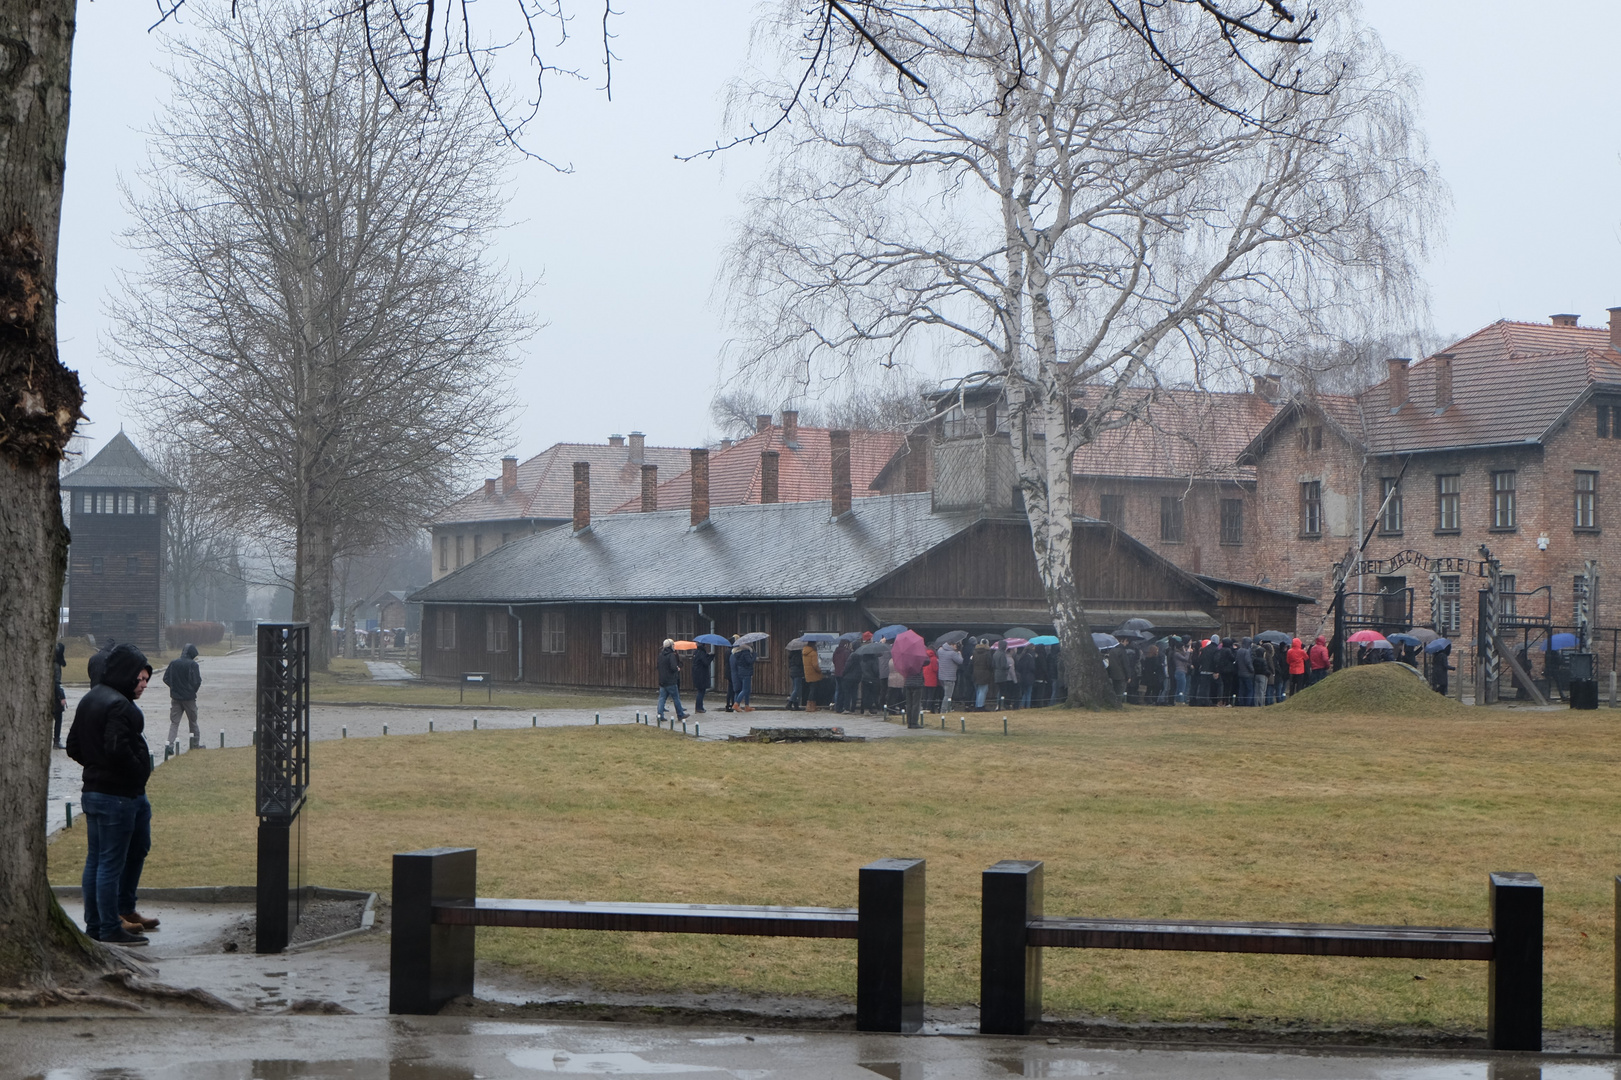 Auschwitz (1) ... just a few steps to entry...